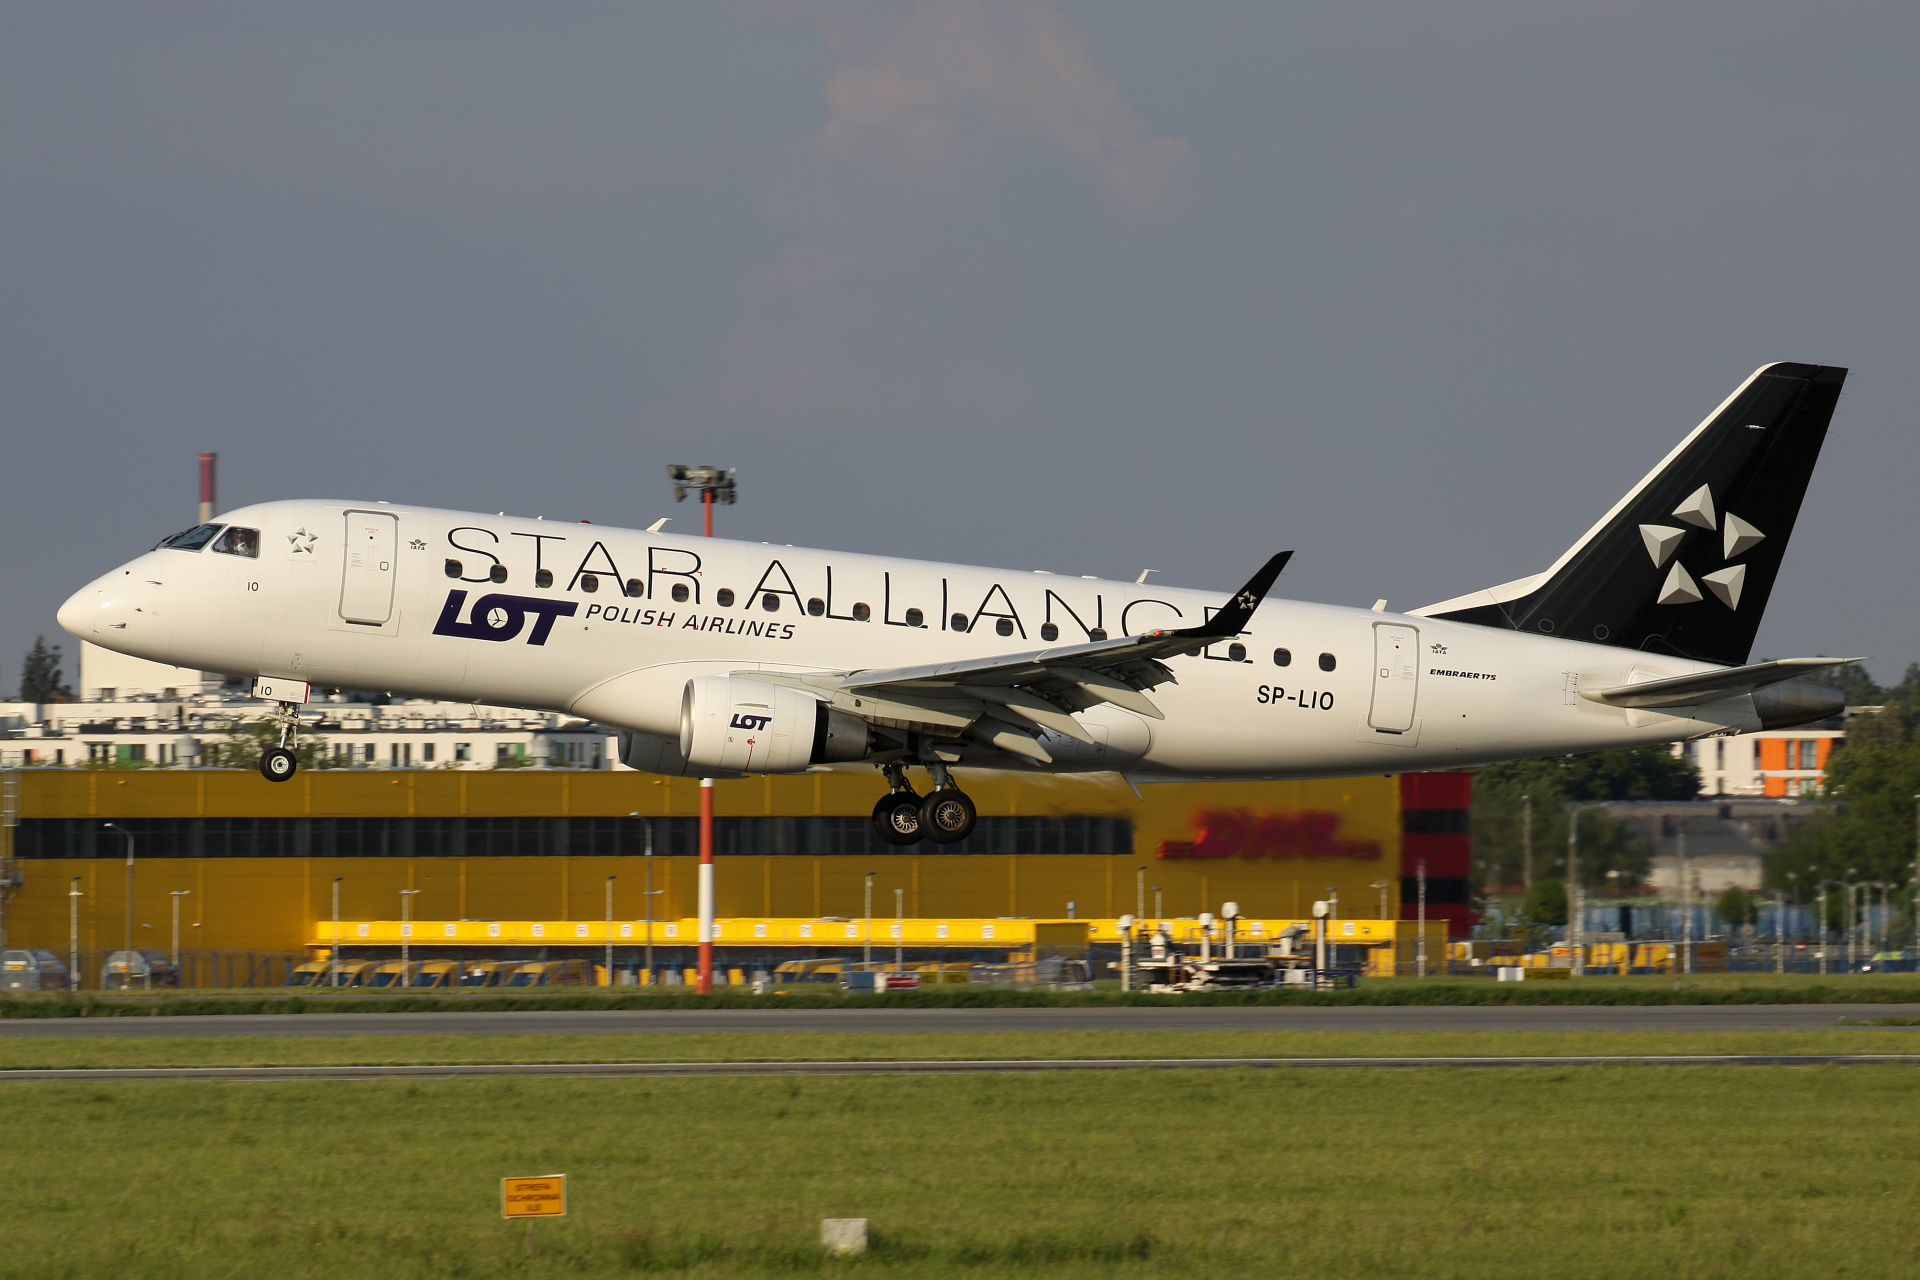 SP-LIO (Star Alliance livery) (Aircraft » EPWA Spotting » Embraer E175 » LOT Polish Airlines)